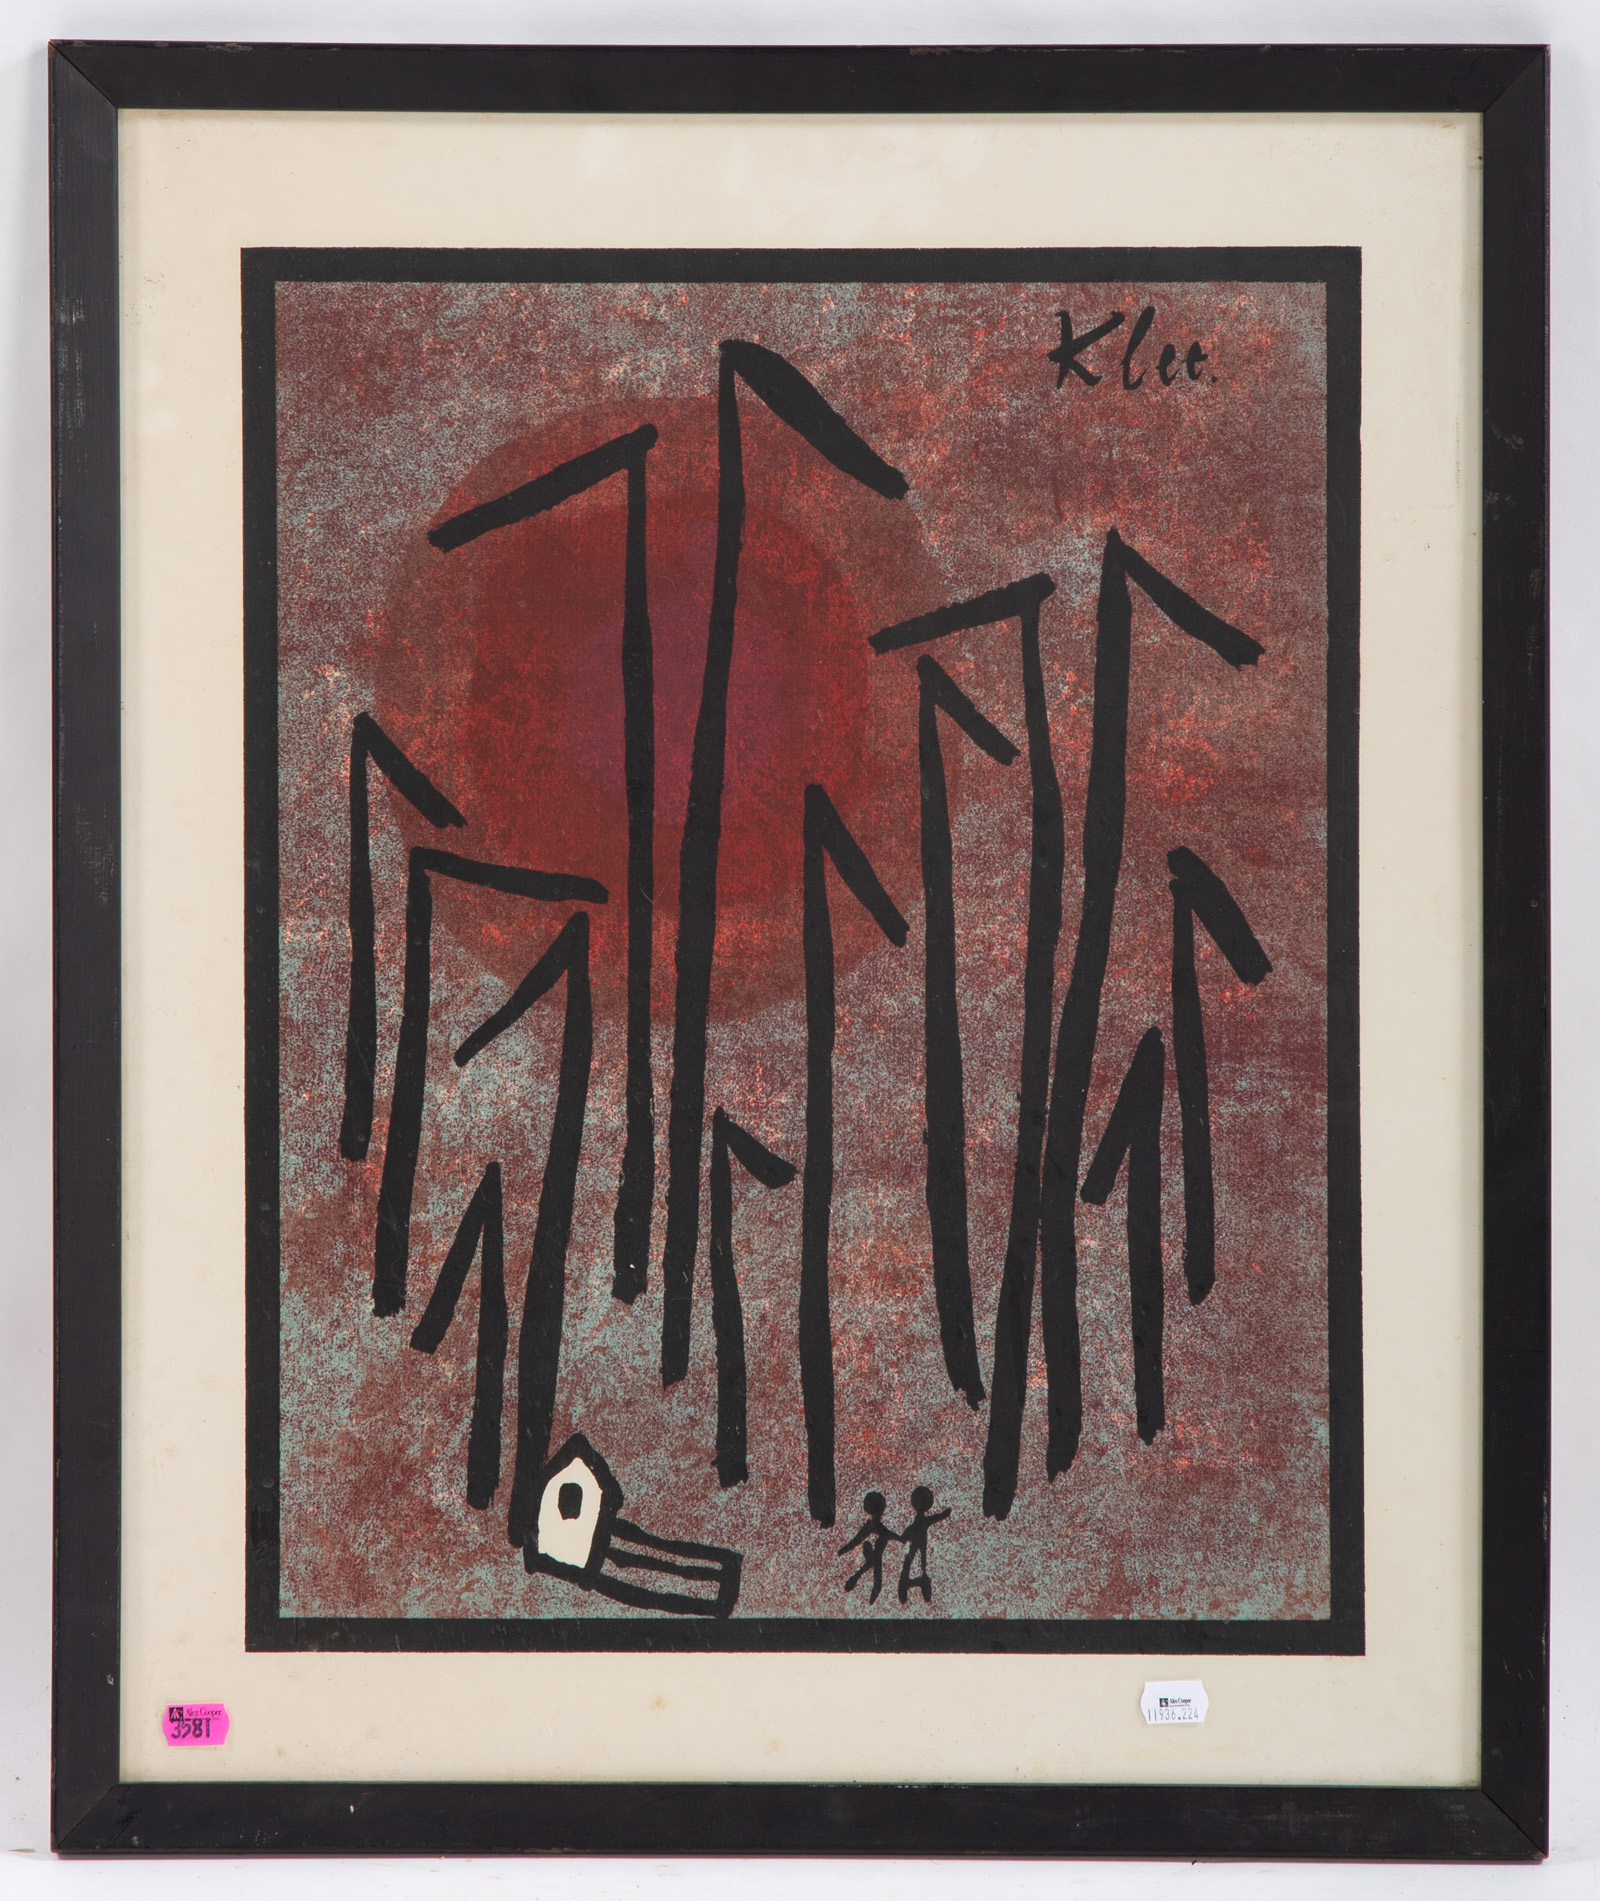 PAUL KLEE. UNTITLED, COLOR LITHOGRAPH